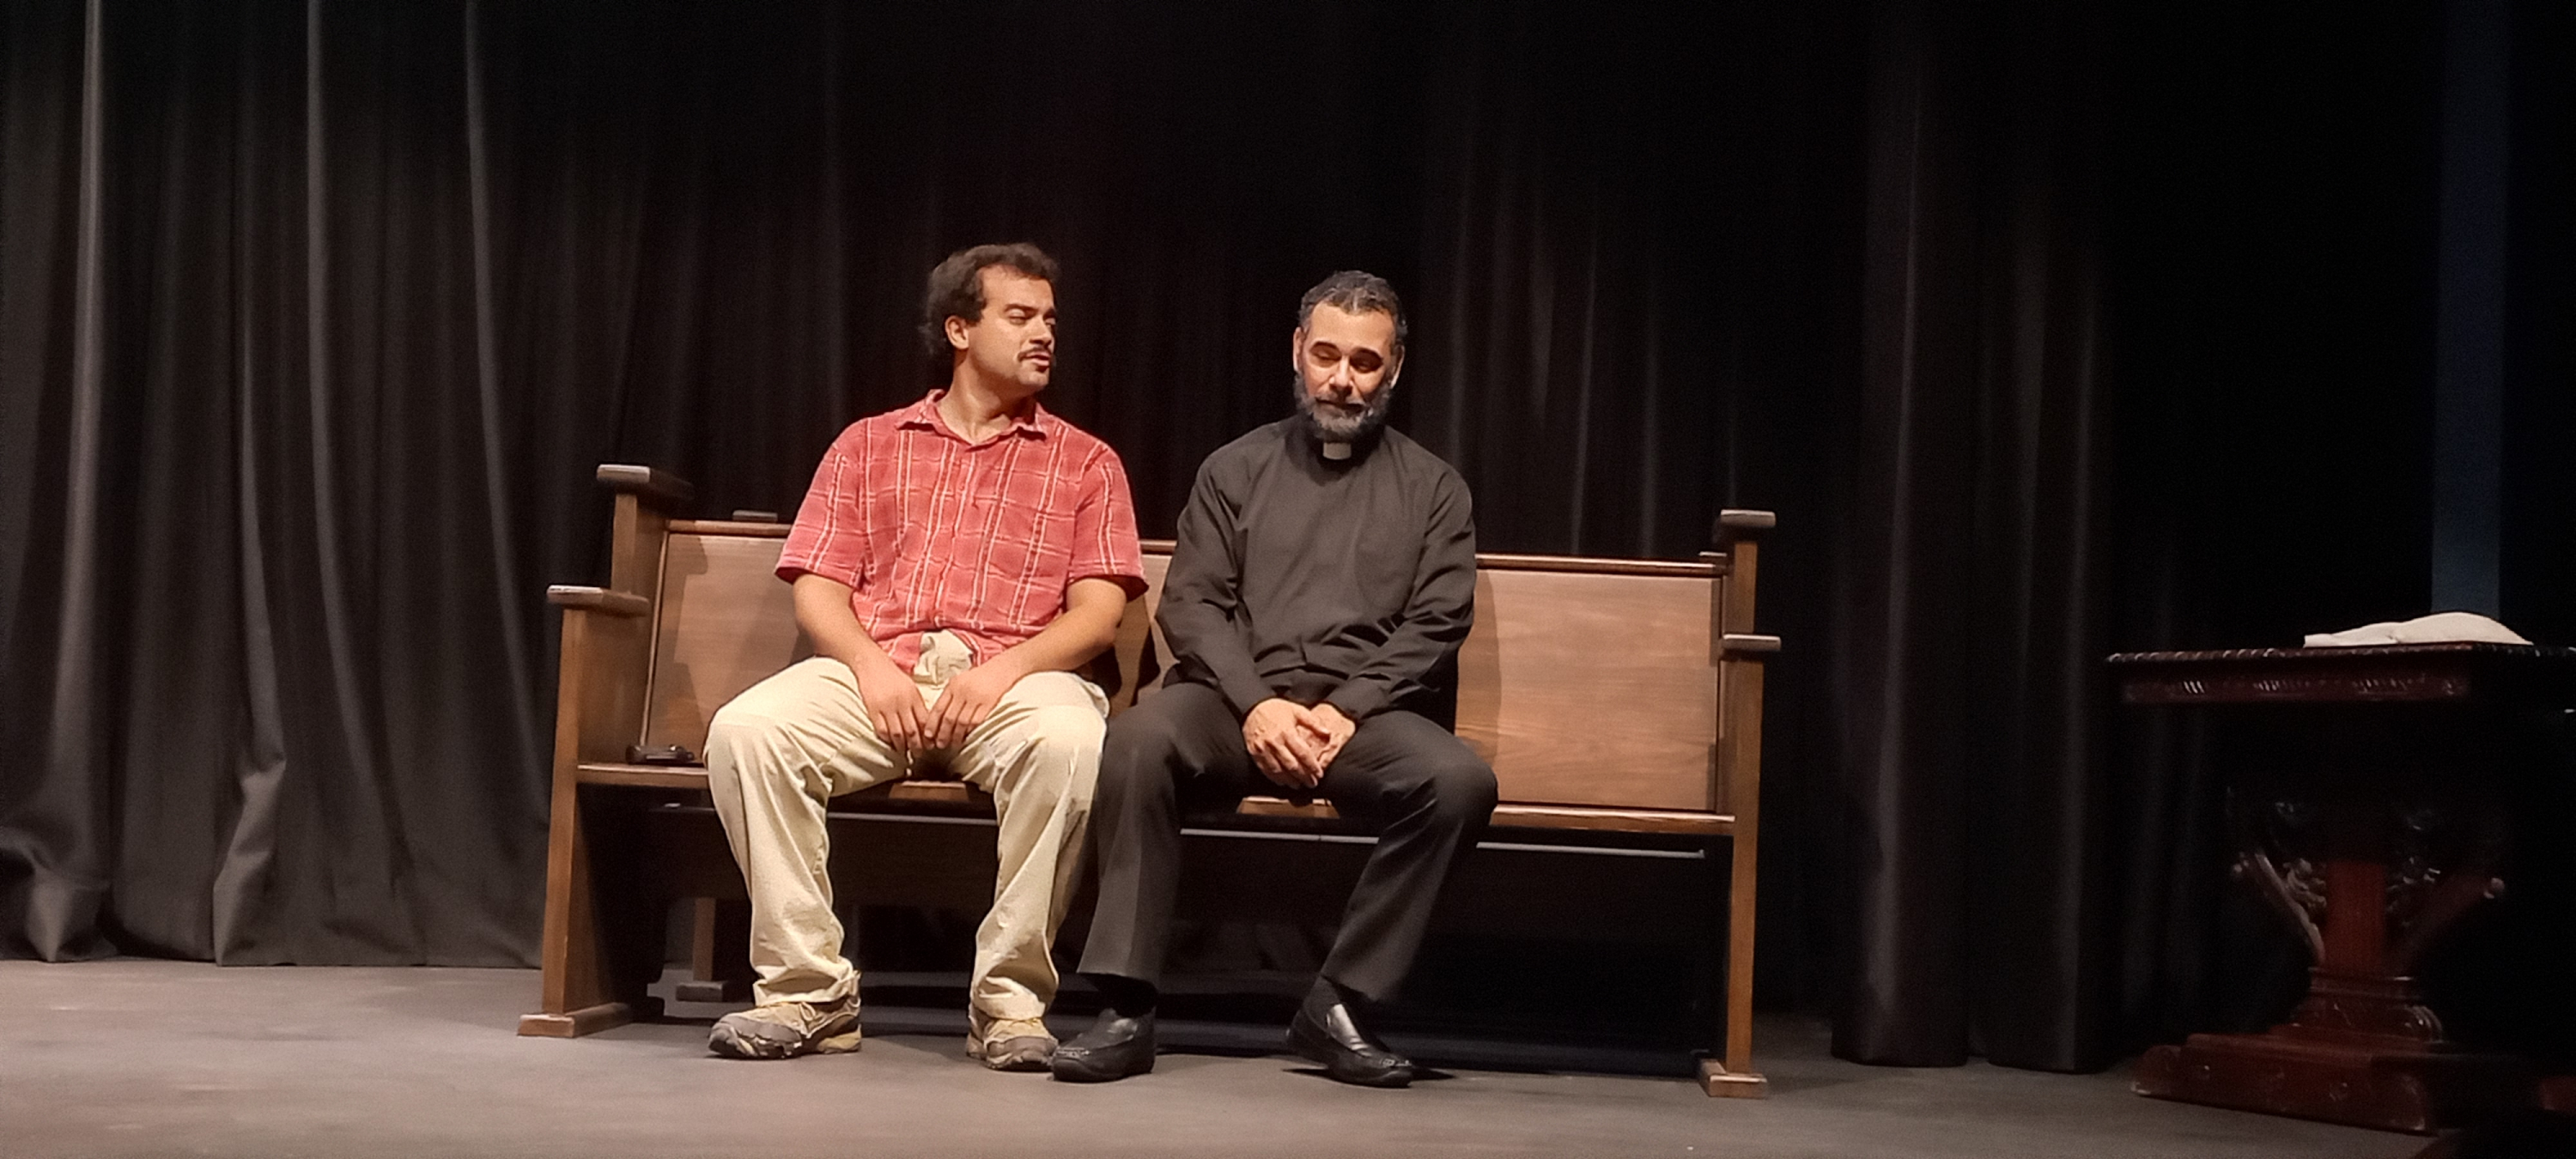 José Roberto Díaz and Jovany Pepín star in the play, “Padre Pedro”, which was presented at the Lope de Vega Theater, located in Novocentro.